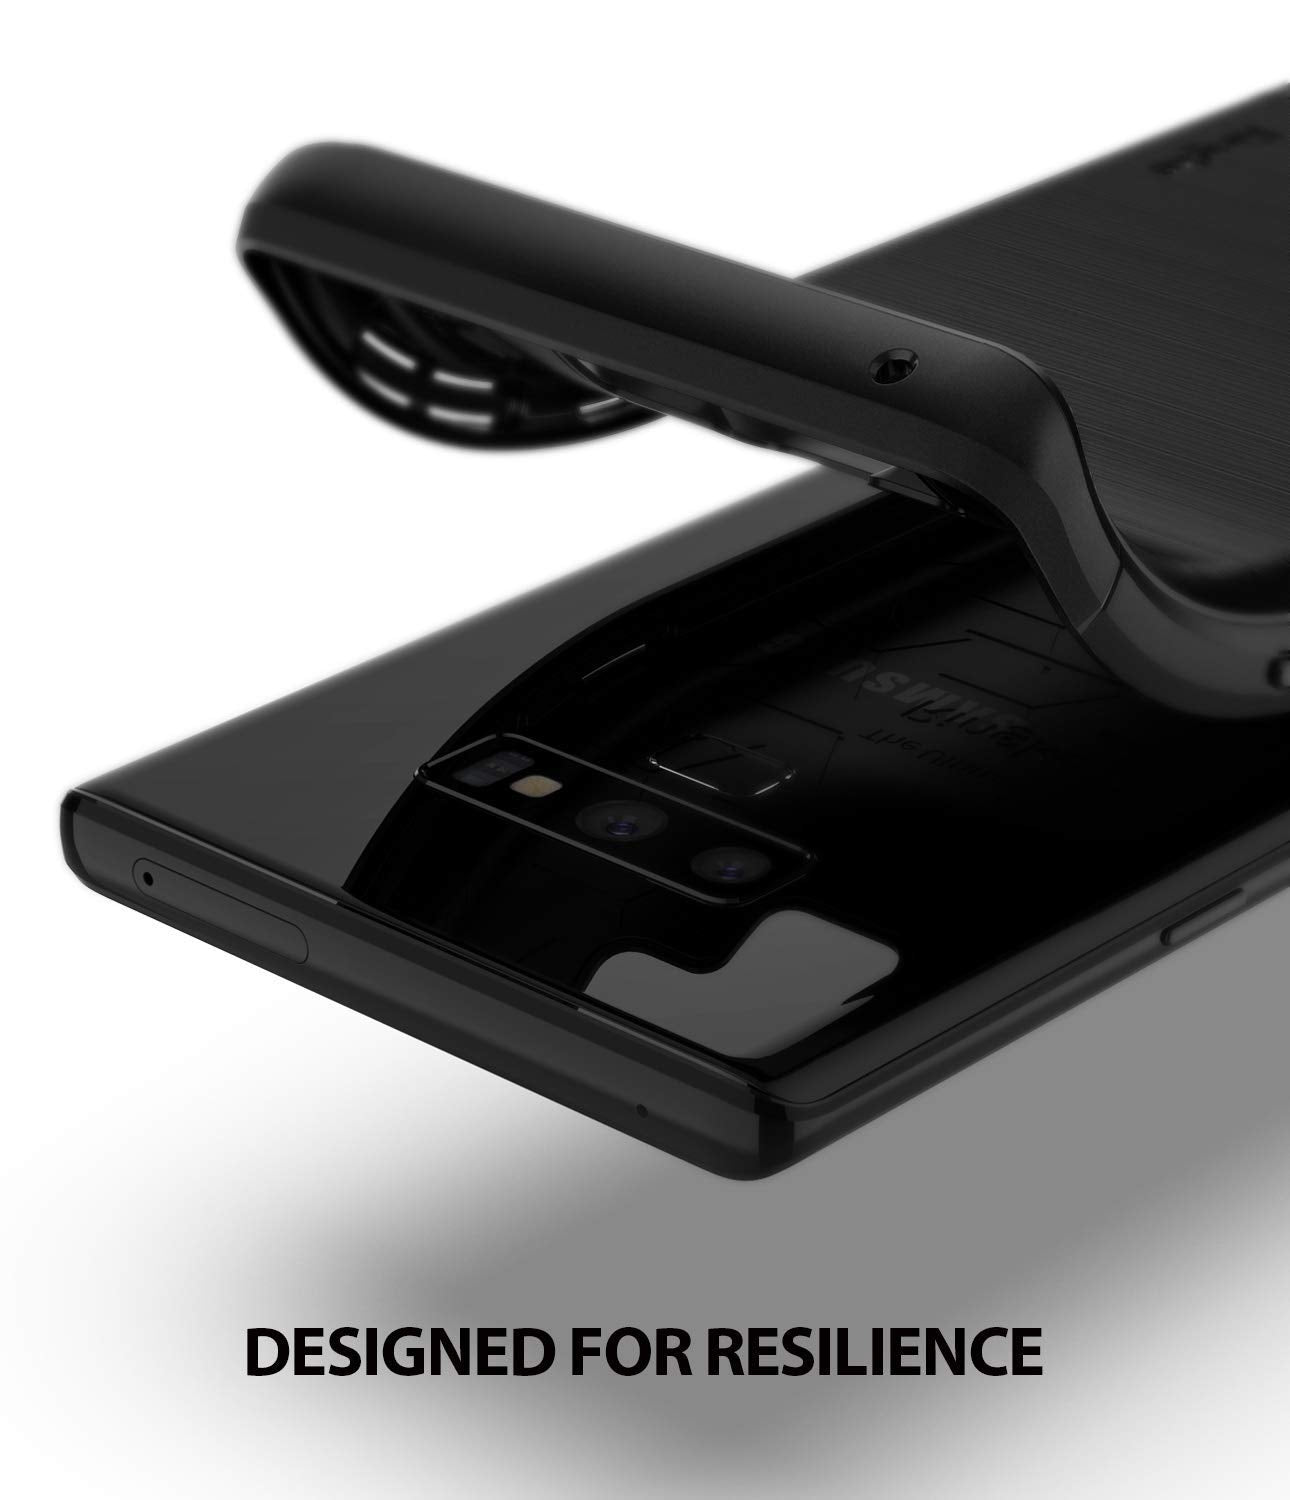 designed for resilience